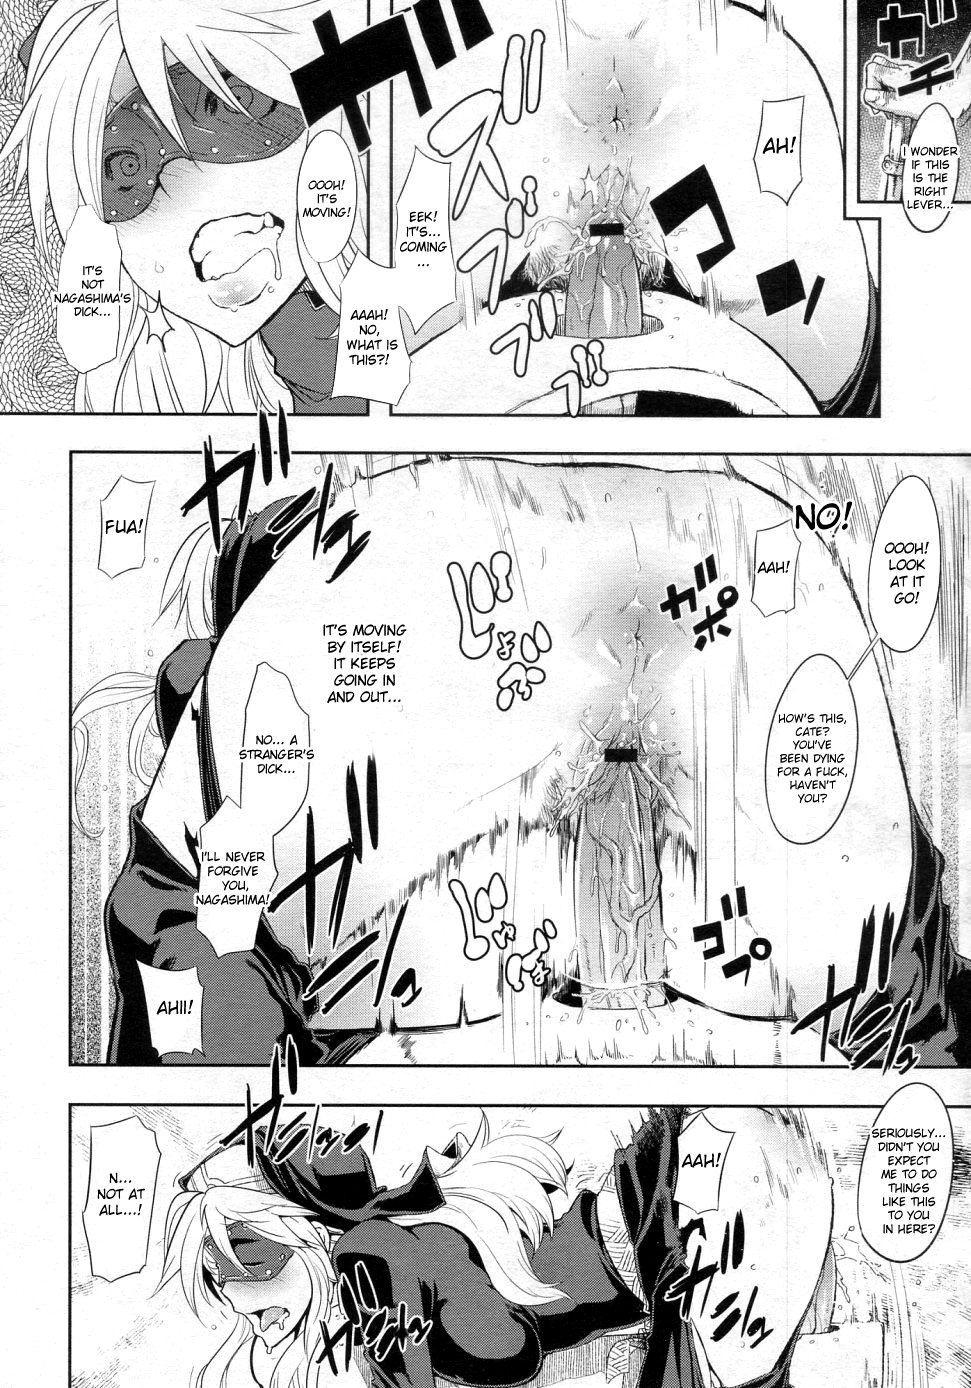 [ShindoL] Incubus Ch. 1-2 [English] {doujin-moe.us} page 46 full